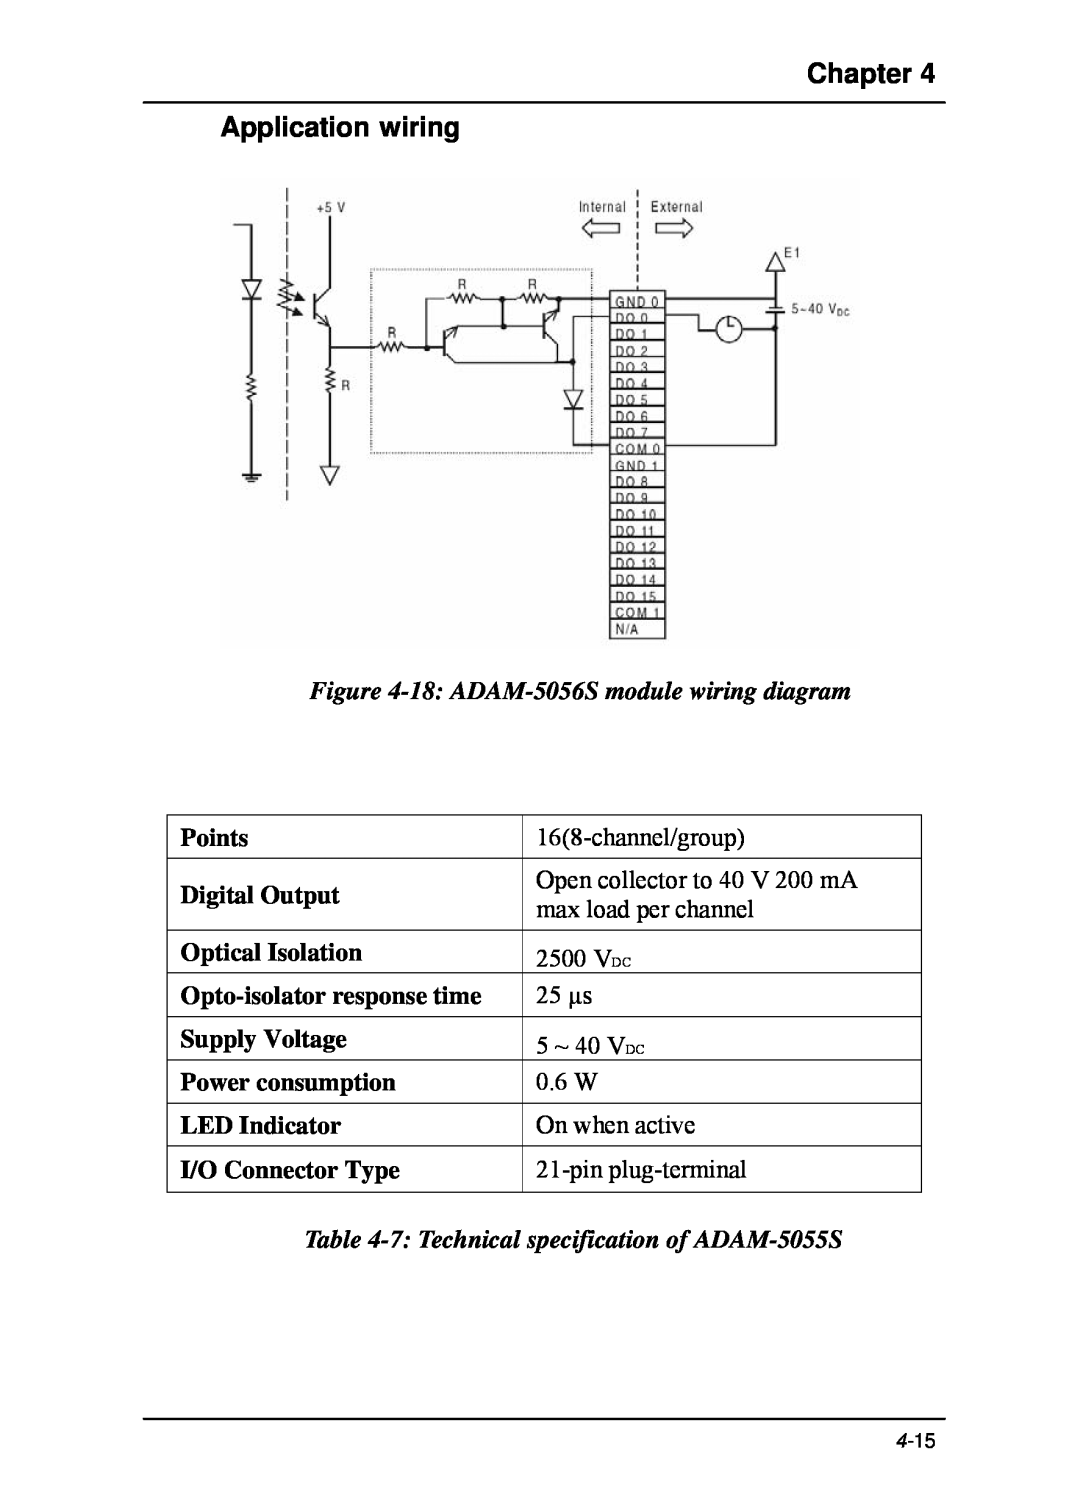 B&B Electronics 5000 Series 18 ADAM-5056S module wiring diagram, 7 Technical specification of ADAM-5055S, Points, 4-15 